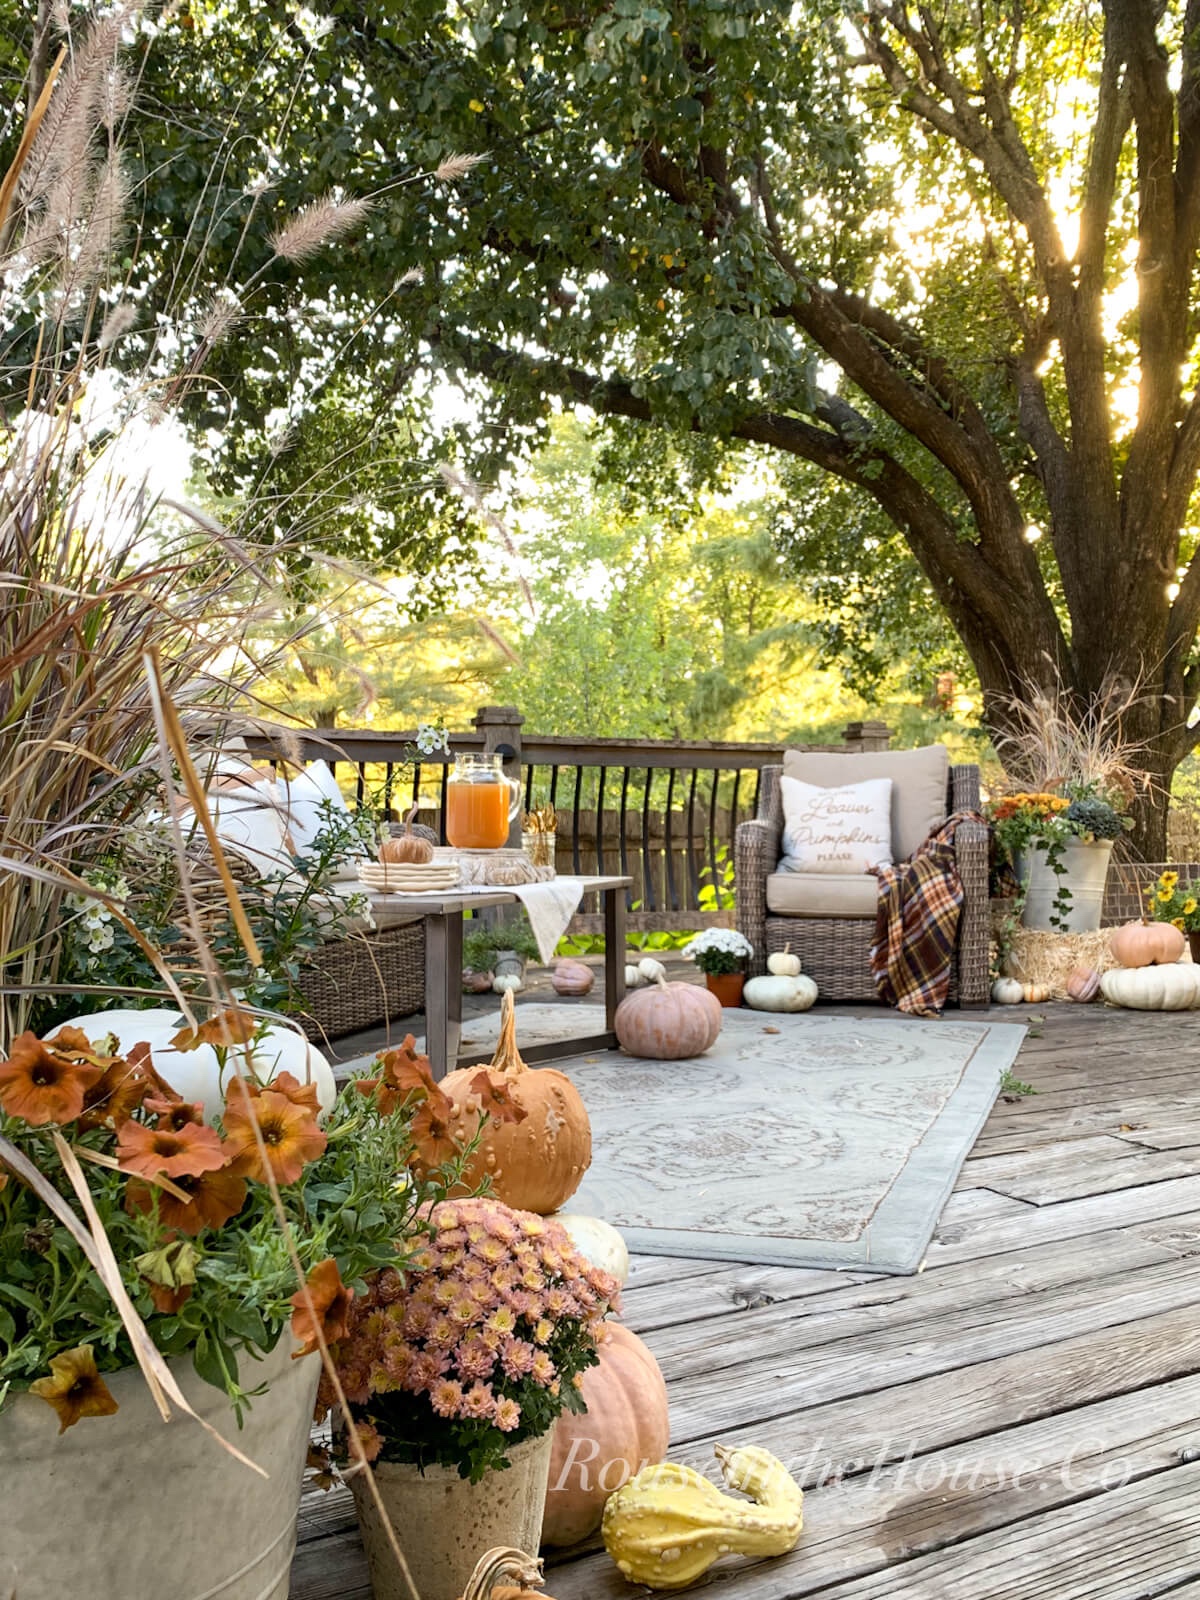 A outdoor wooden deck all decked out with nautral fall decor at sunset.  